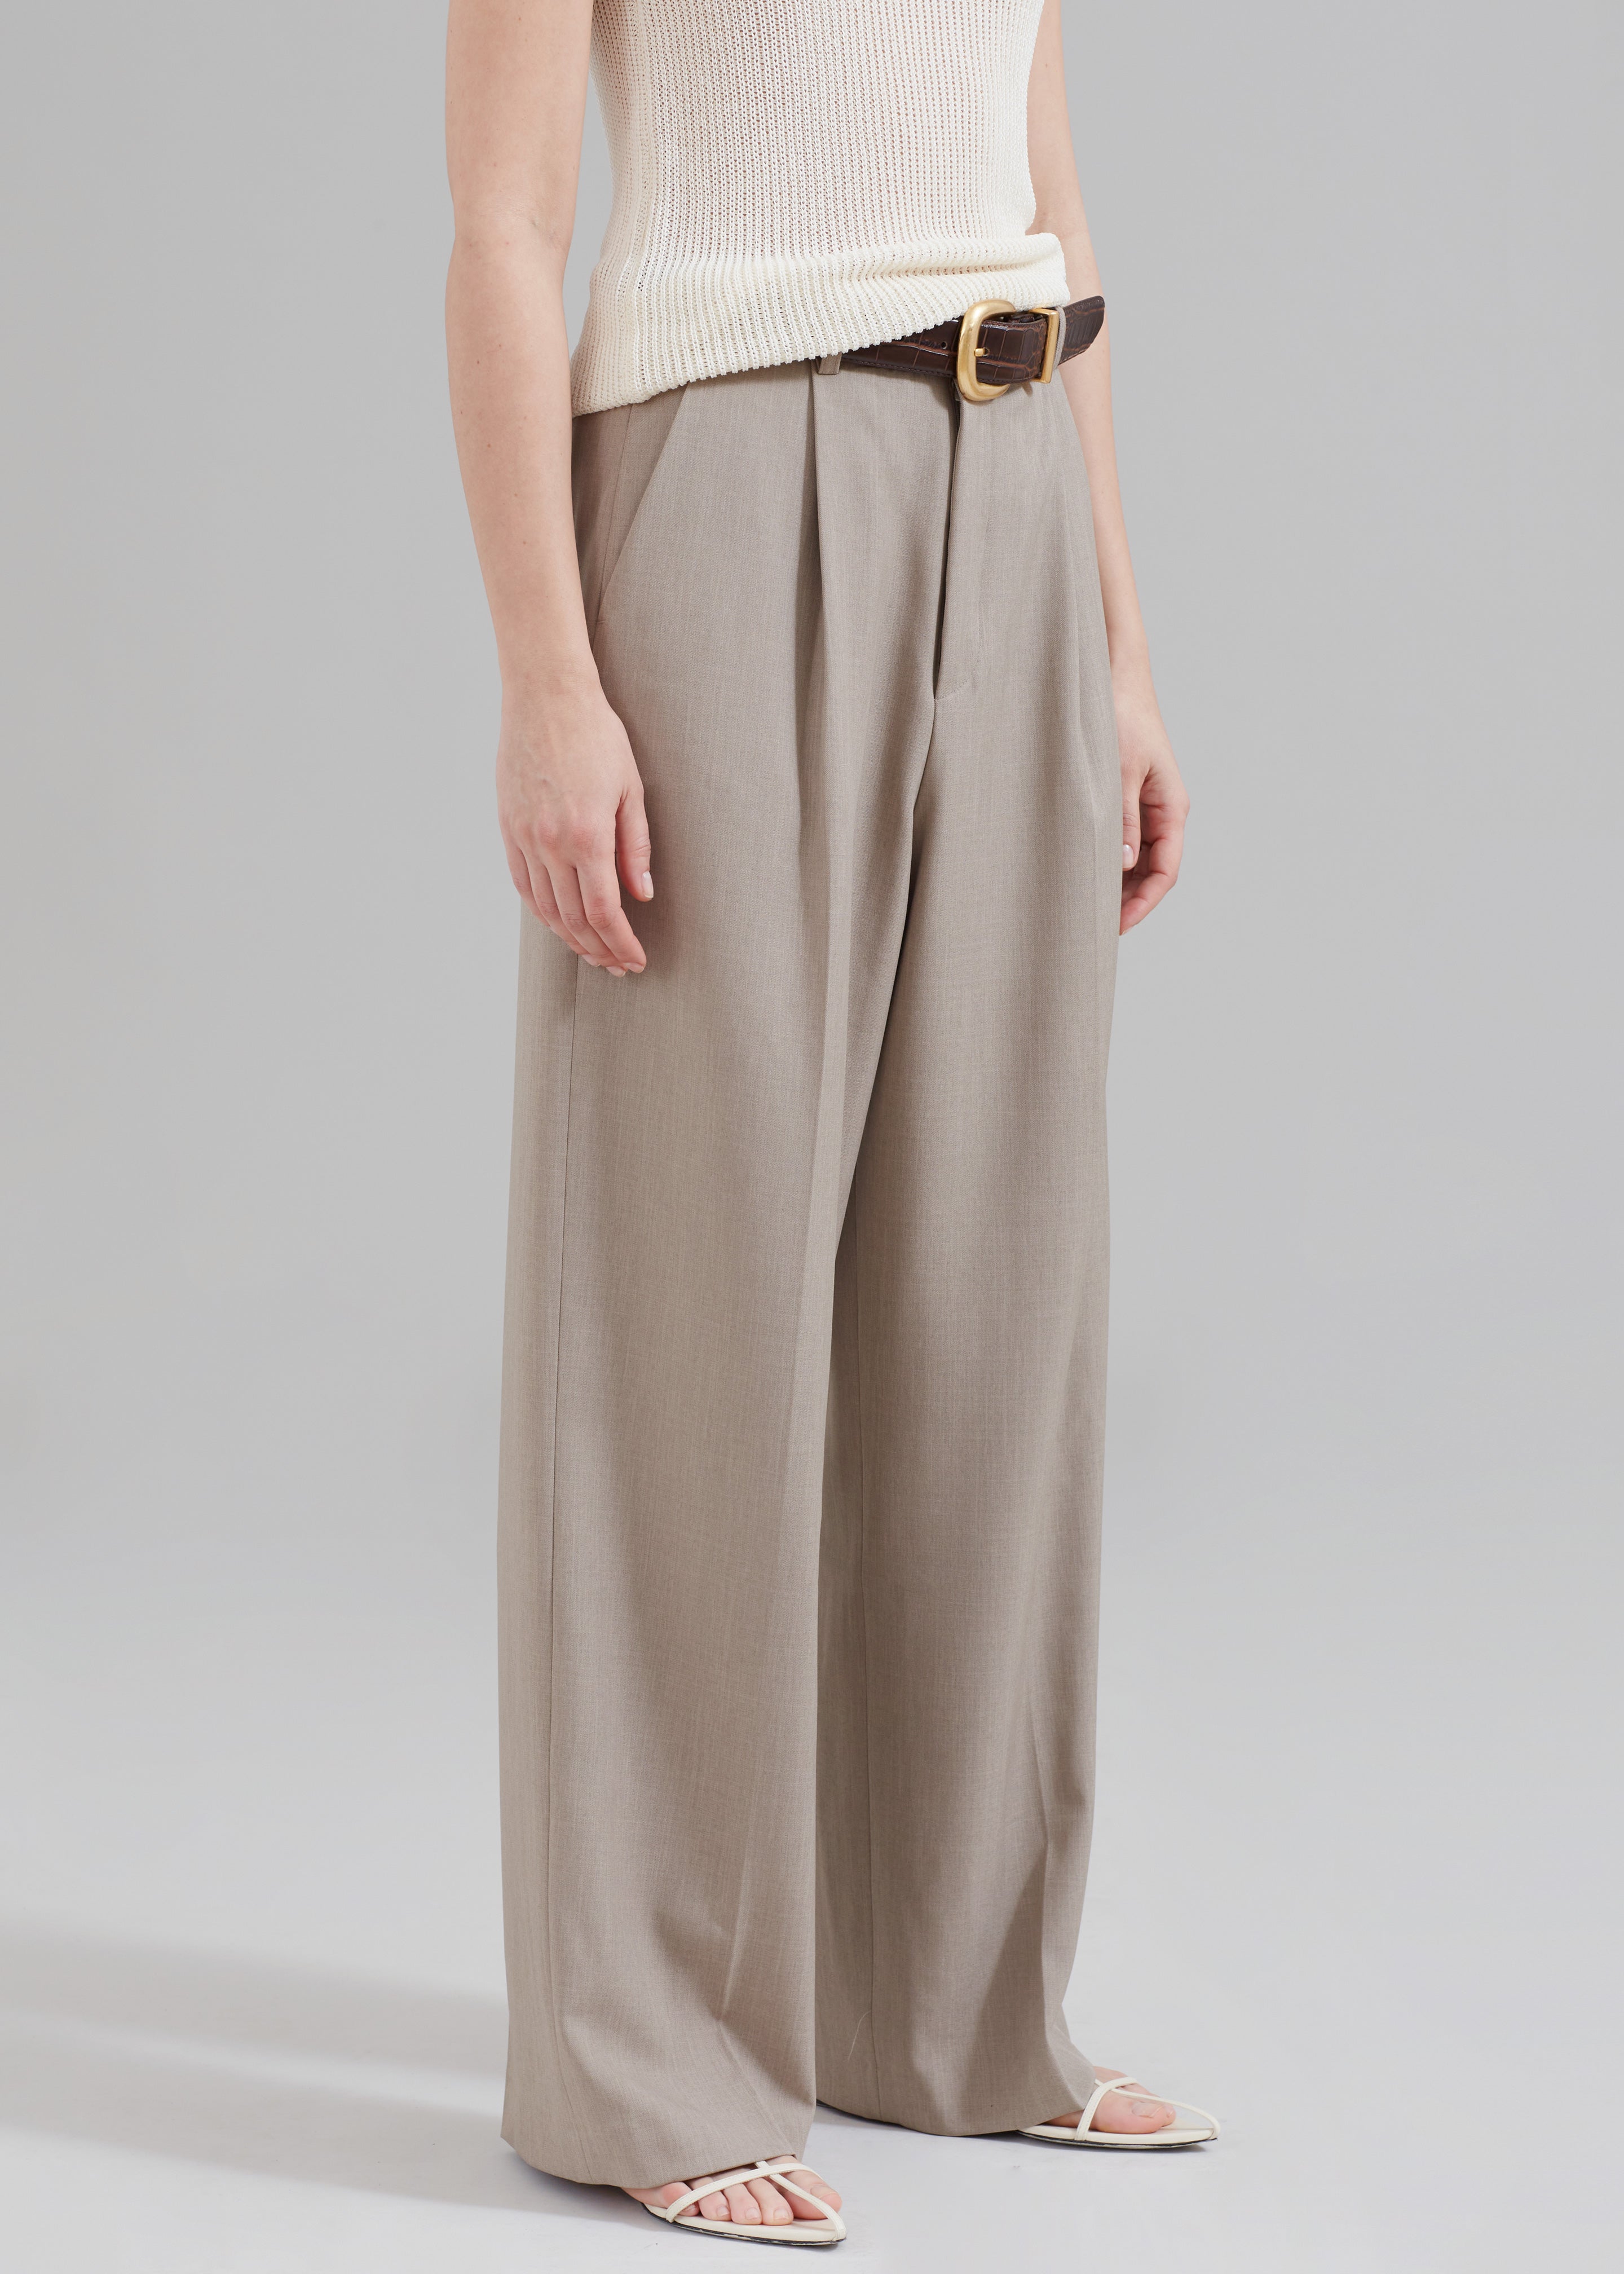 Linen Textured Pants Taupe - Alhambra | Women's Clothing Boutique, Seattle